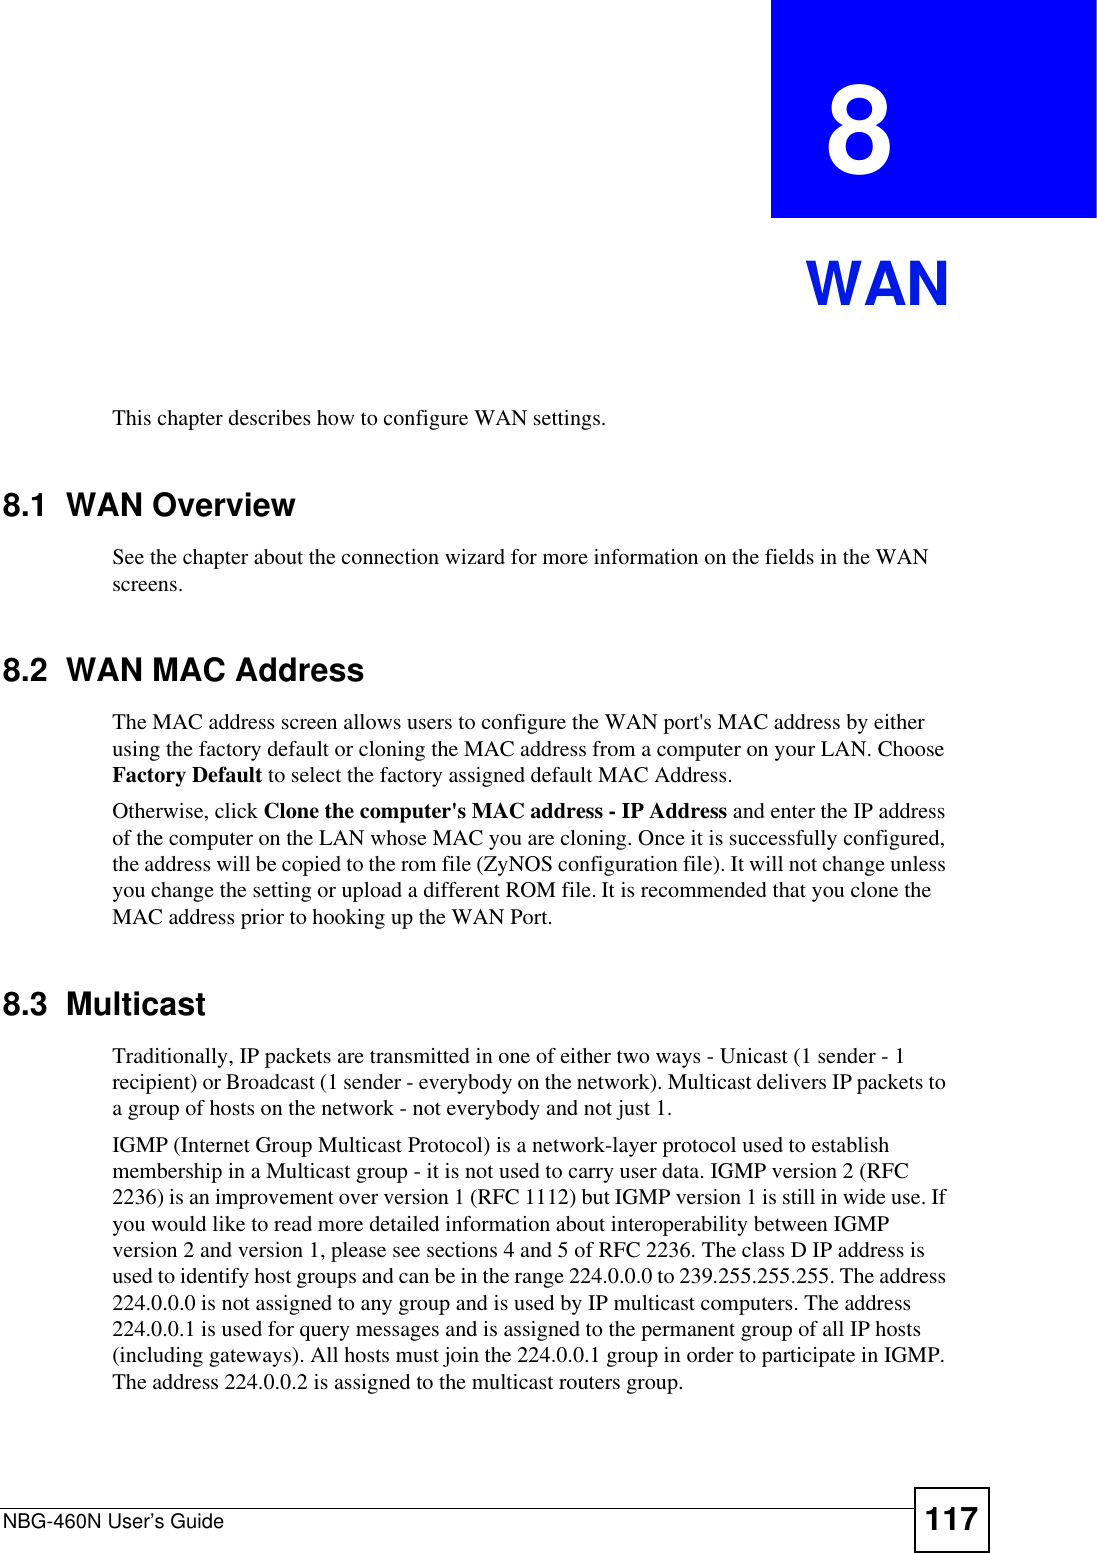 NBG-460N User’s Guide 117CHAPTER  8 WANThis chapter describes how to configure WAN settings.8.1  WAN OverviewSee the chapter about the connection wizard for more information on the fields in the WAN screens.8.2  WAN MAC AddressThe MAC address screen allows users to configure the WAN port&apos;s MAC address by either using the factory default or cloning the MAC address from a computer on your LAN. Choose Factory Default to select the factory assigned default MAC Address.Otherwise, click Clone the computer&apos;s MAC address - IP Address and enter the IP address of the computer on the LAN whose MAC you are cloning. Once it is successfully configured, the address will be copied to the rom file (ZyNOS configuration file). It will not change unless you change the setting or upload a different ROM file. It is recommended that you clone the MAC address prior to hooking up the WAN Port.8.3  MulticastTraditionally, IP packets are transmitted in one of either two ways - Unicast (1 sender - 1 recipient) or Broadcast (1 sender - everybody on the network). Multicast delivers IP packets to a group of hosts on the network - not everybody and not just 1. IGMP (Internet Group Multicast Protocol) is a network-layer protocol used to establish membership in a Multicast group - it is not used to carry user data. IGMP version 2 (RFC 2236) is an improvement over version 1 (RFC 1112) but IGMP version 1 is still in wide use. If you would like to read more detailed information about interoperability between IGMP version 2 and version 1, please see sections 4 and 5 of RFC 2236. The class D IP address is used to identify host groups and can be in the range 224.0.0.0 to 239.255.255.255. The address 224.0.0.0 is not assigned to any group and is used by IP multicast computers. The address 224.0.0.1 is used for query messages and is assigned to the permanent group of all IP hosts (including gateways). All hosts must join the 224.0.0.1 group in order to participate in IGMP. The address 224.0.0.2 is assigned to the multicast routers group. 